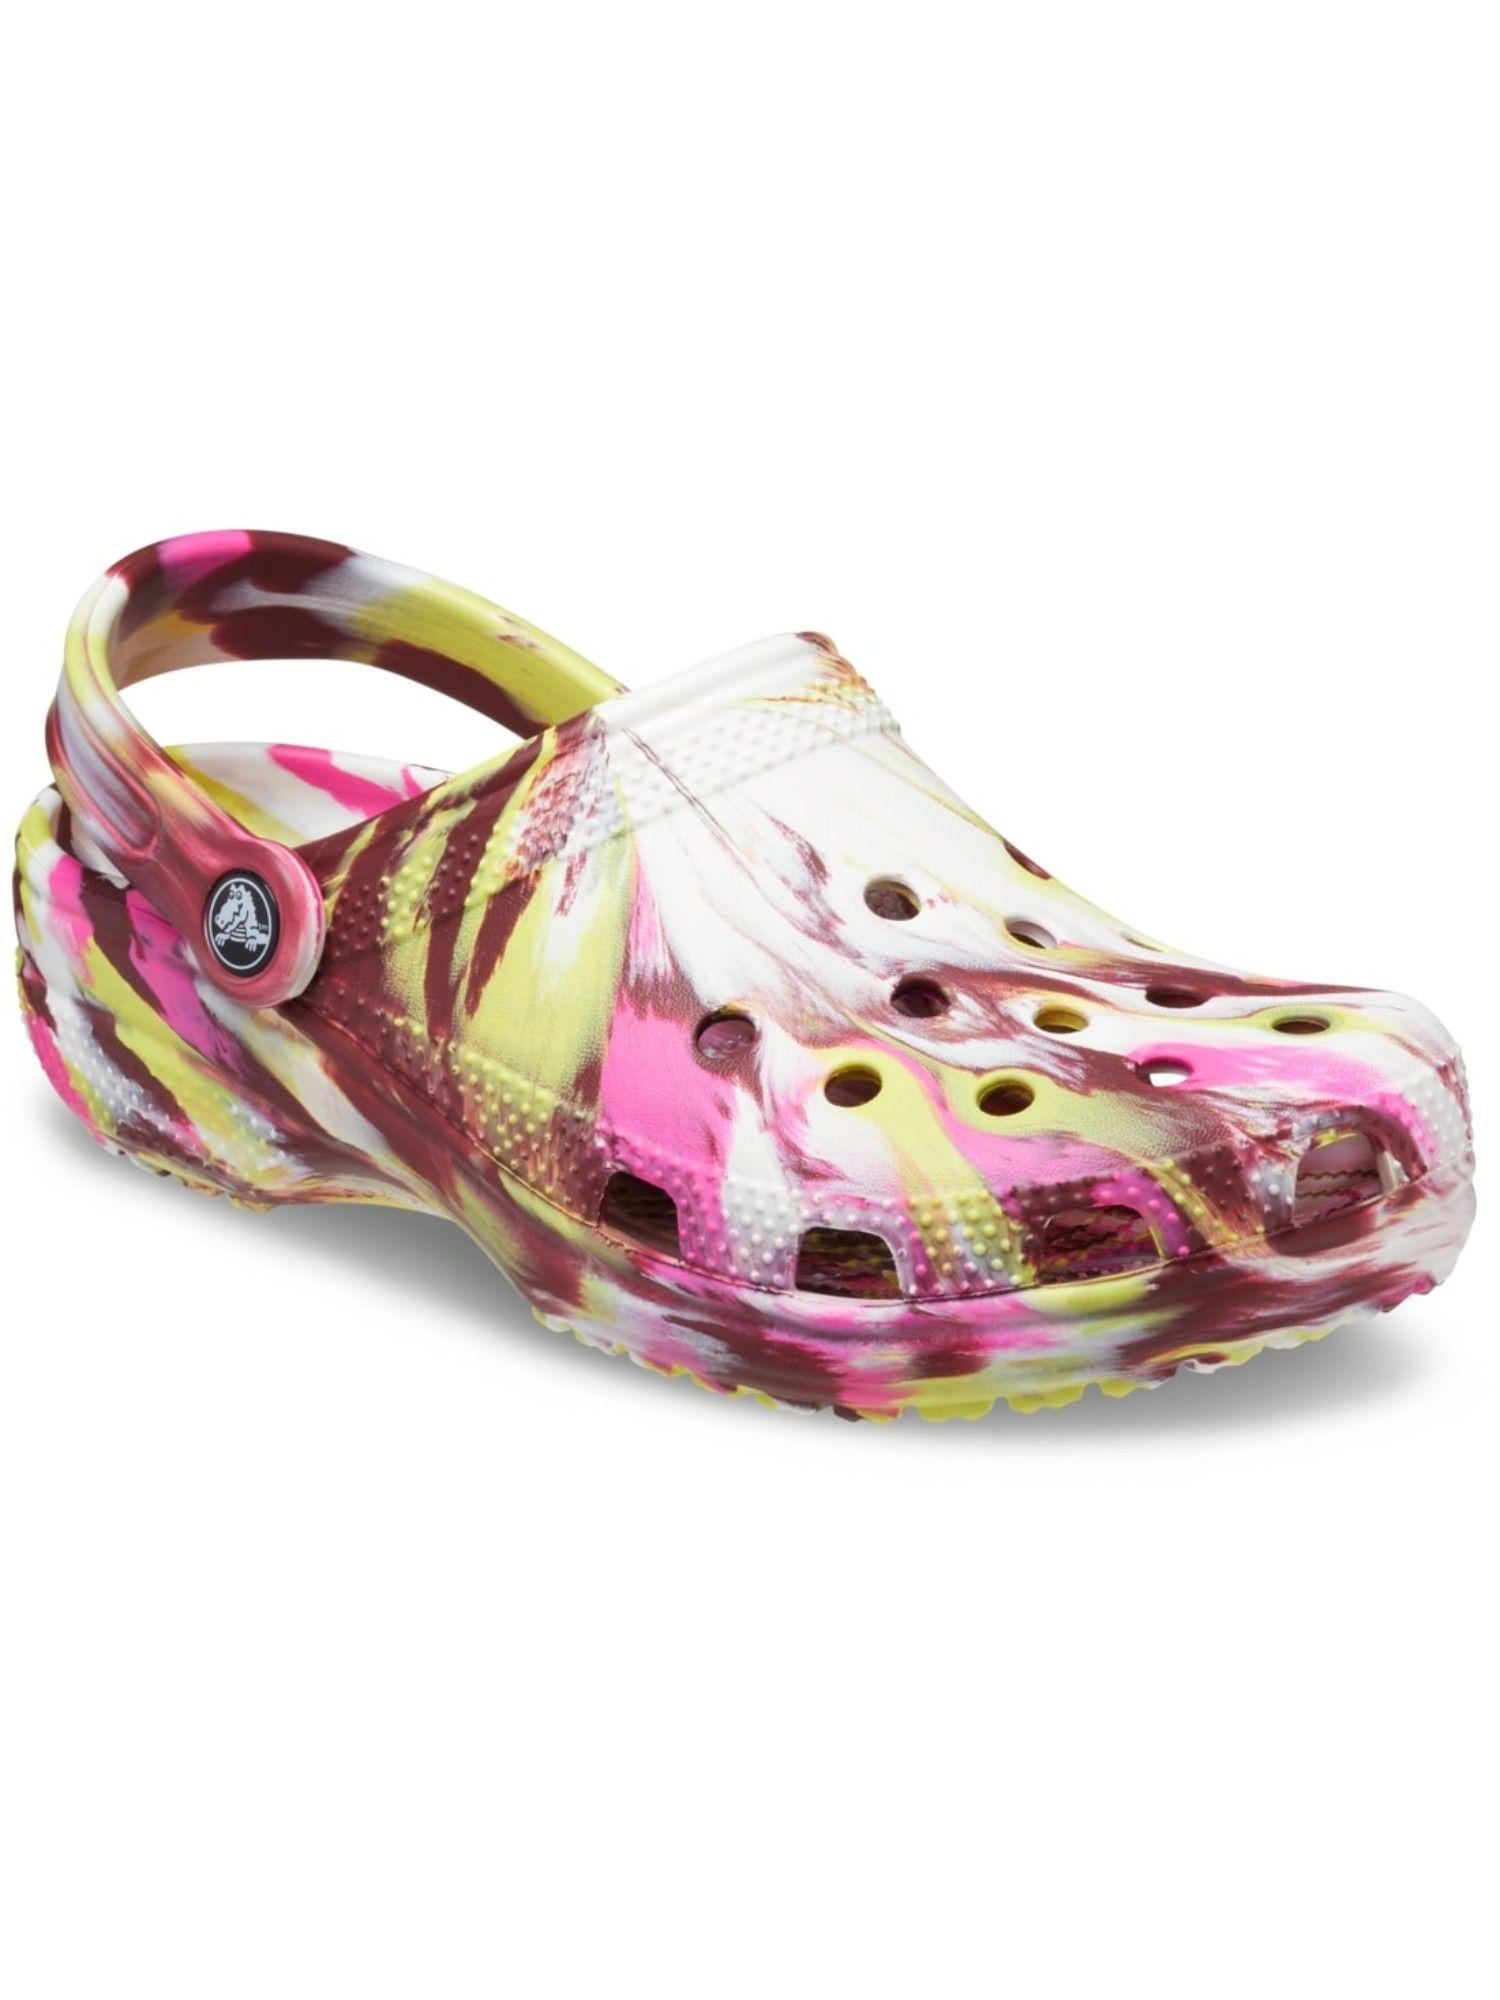 classic-multi-color-unisex-adults-printed-clog